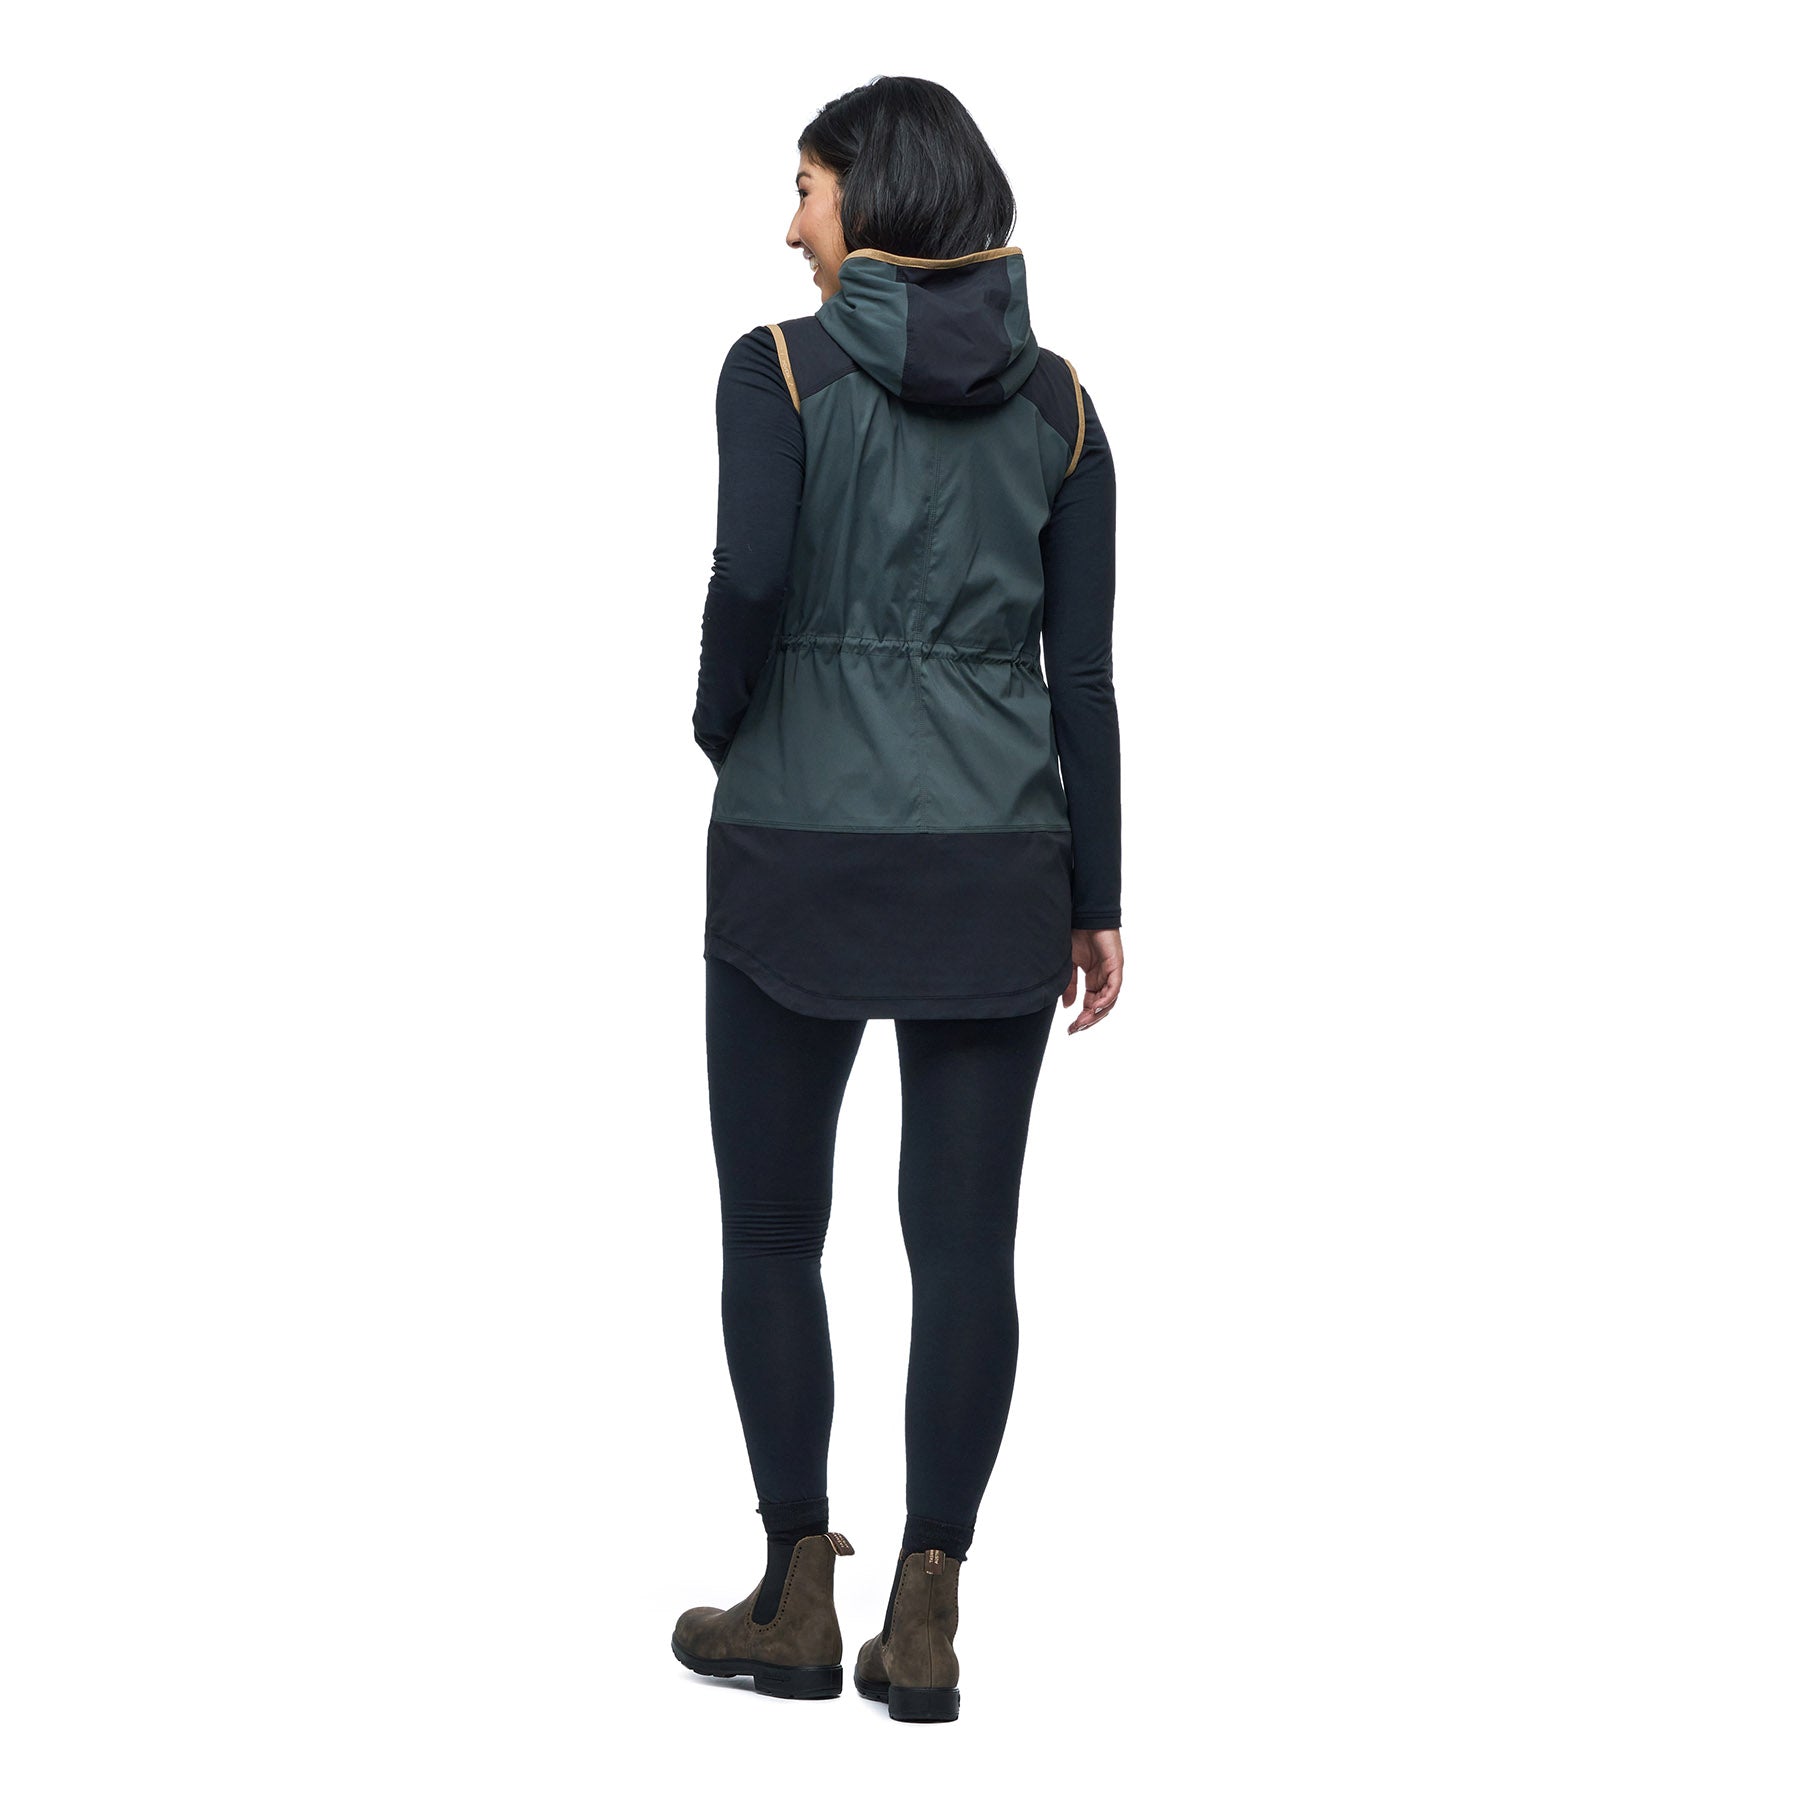 Hero image featuring the back of a female model wearing the Indyeva Cangur pullover vest in pine black.